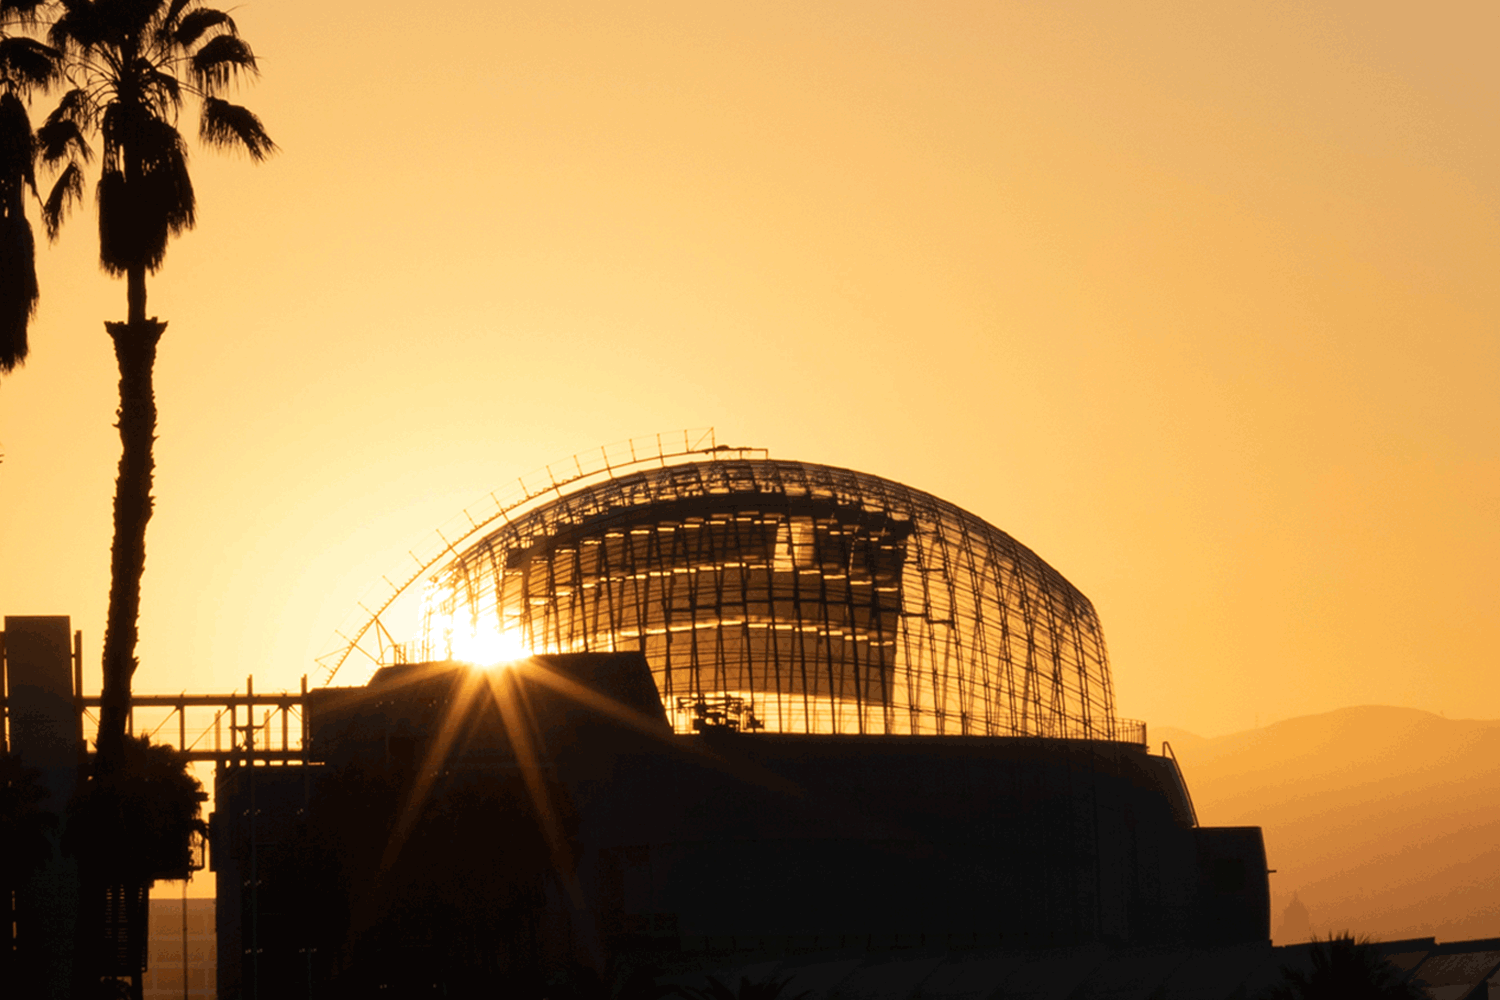 The glass dome of the new Academy Museum terrace appears in silhouette against the setting sun.